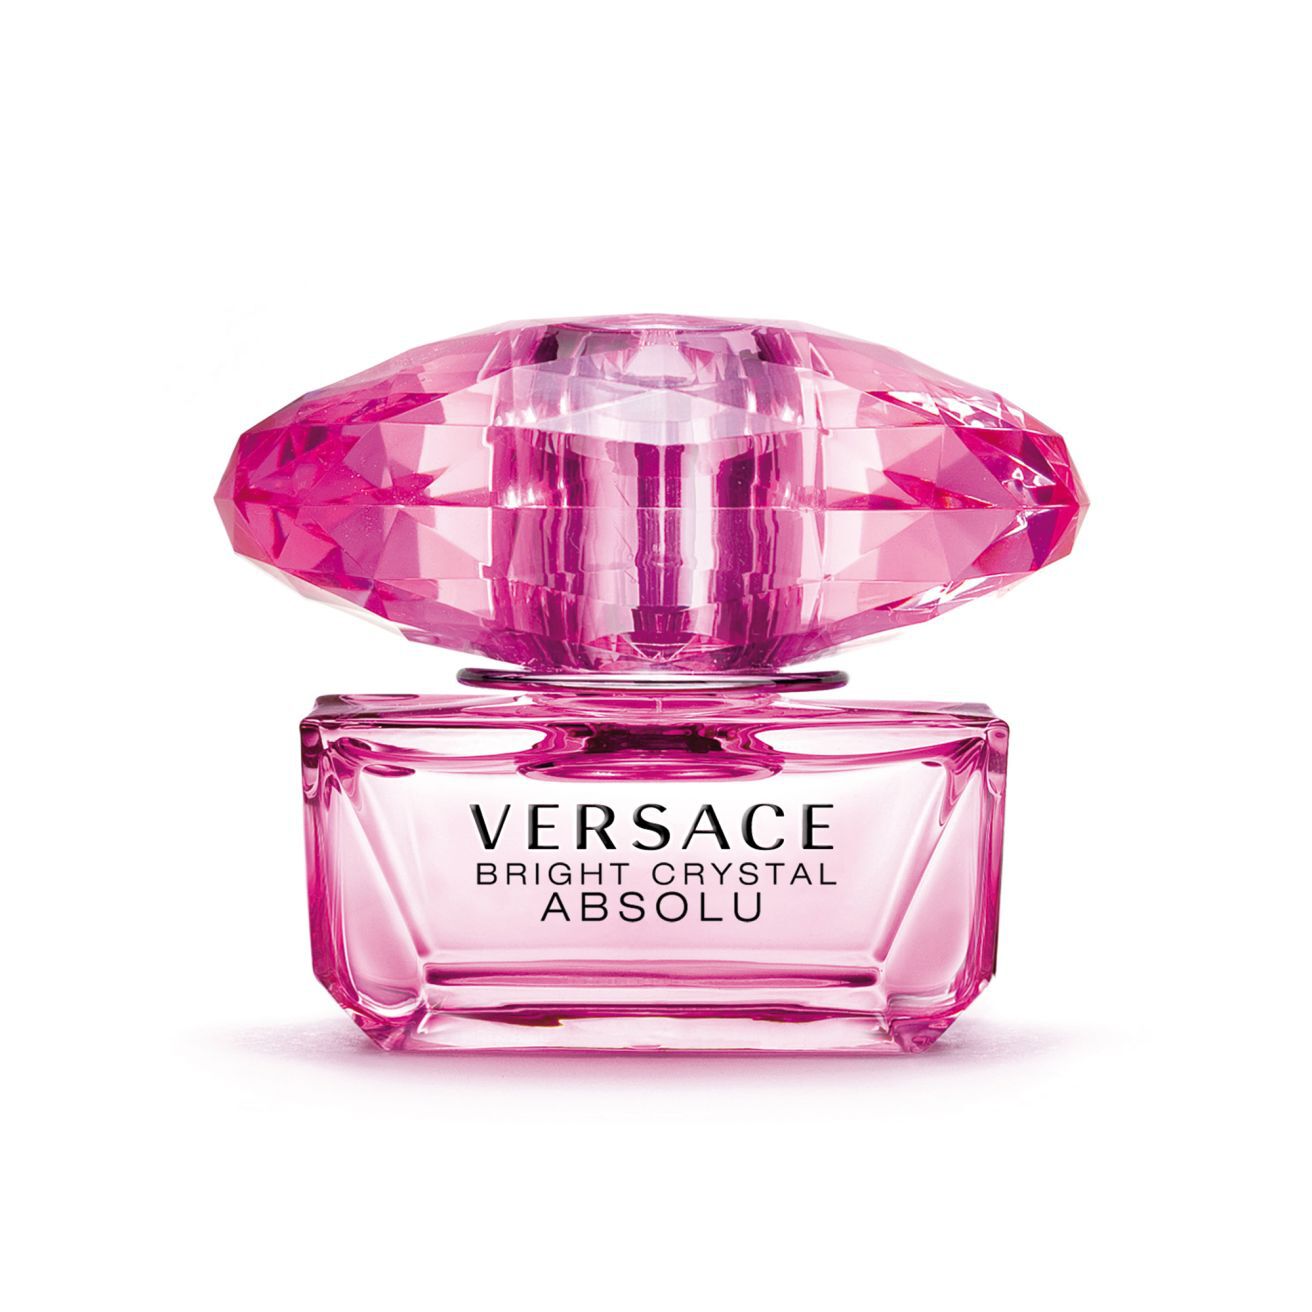 Tester - Versace Bright Crystal "Absolute" W 90ml Tester (with cap) (Rare Selection)